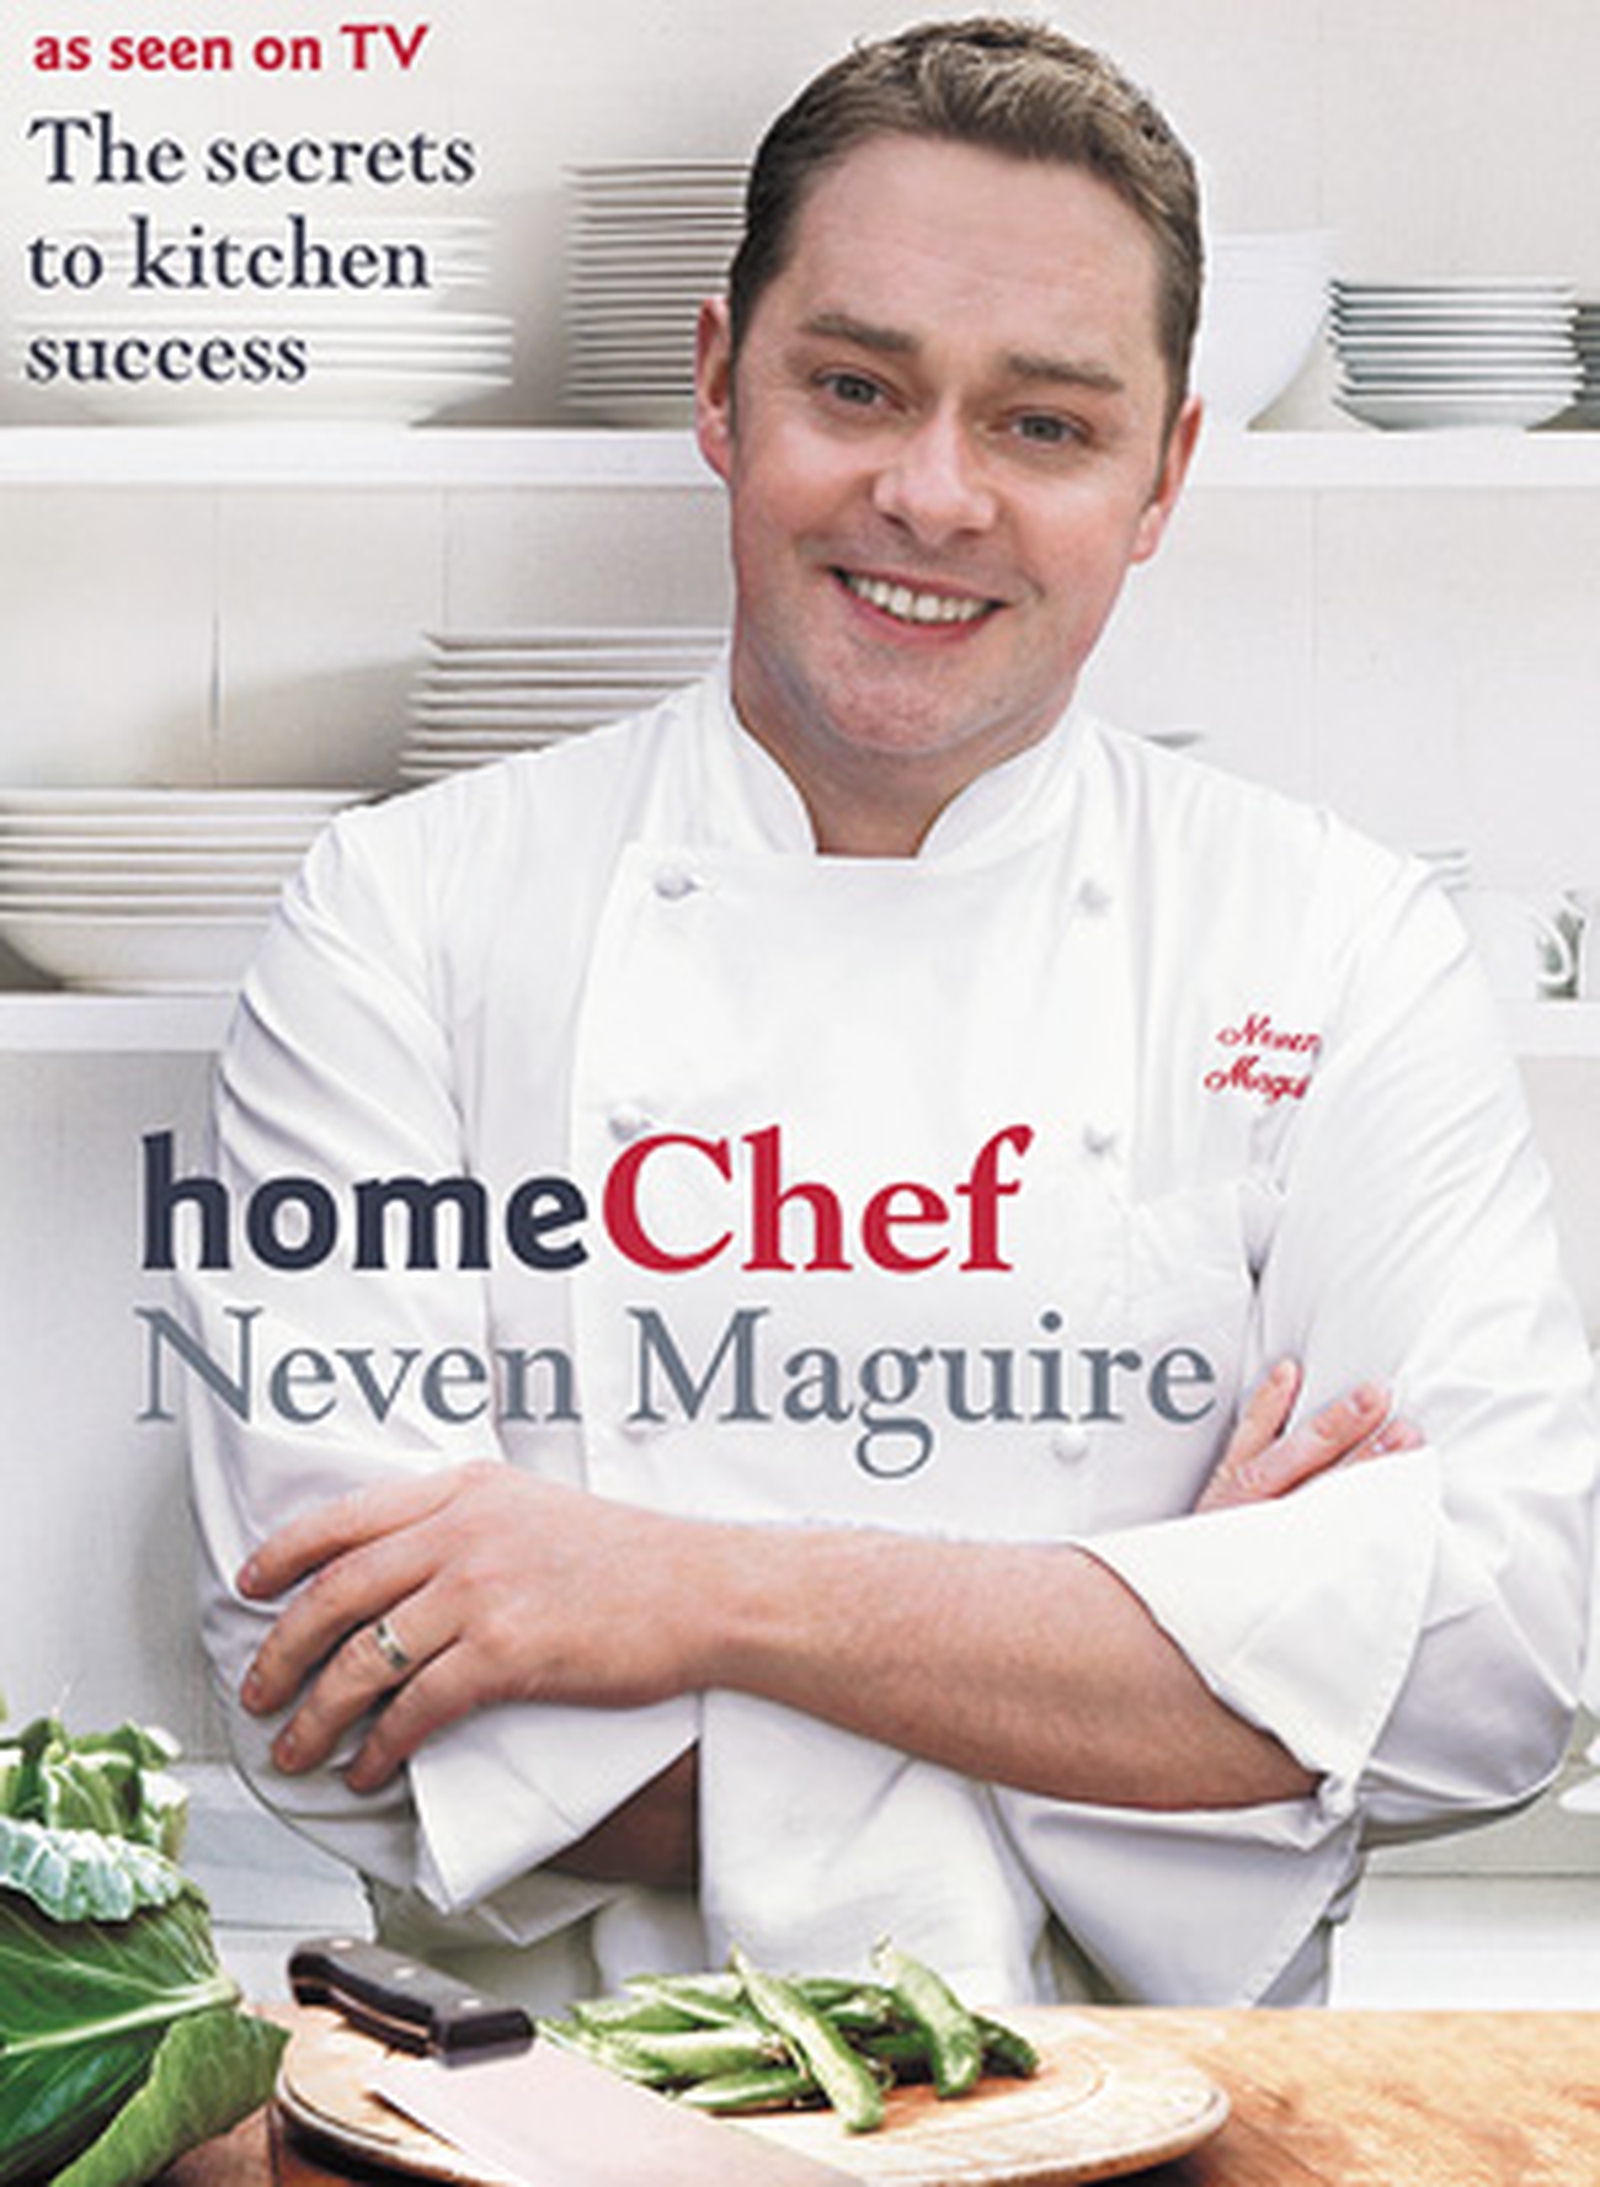 Neven Maguire - Home Chef